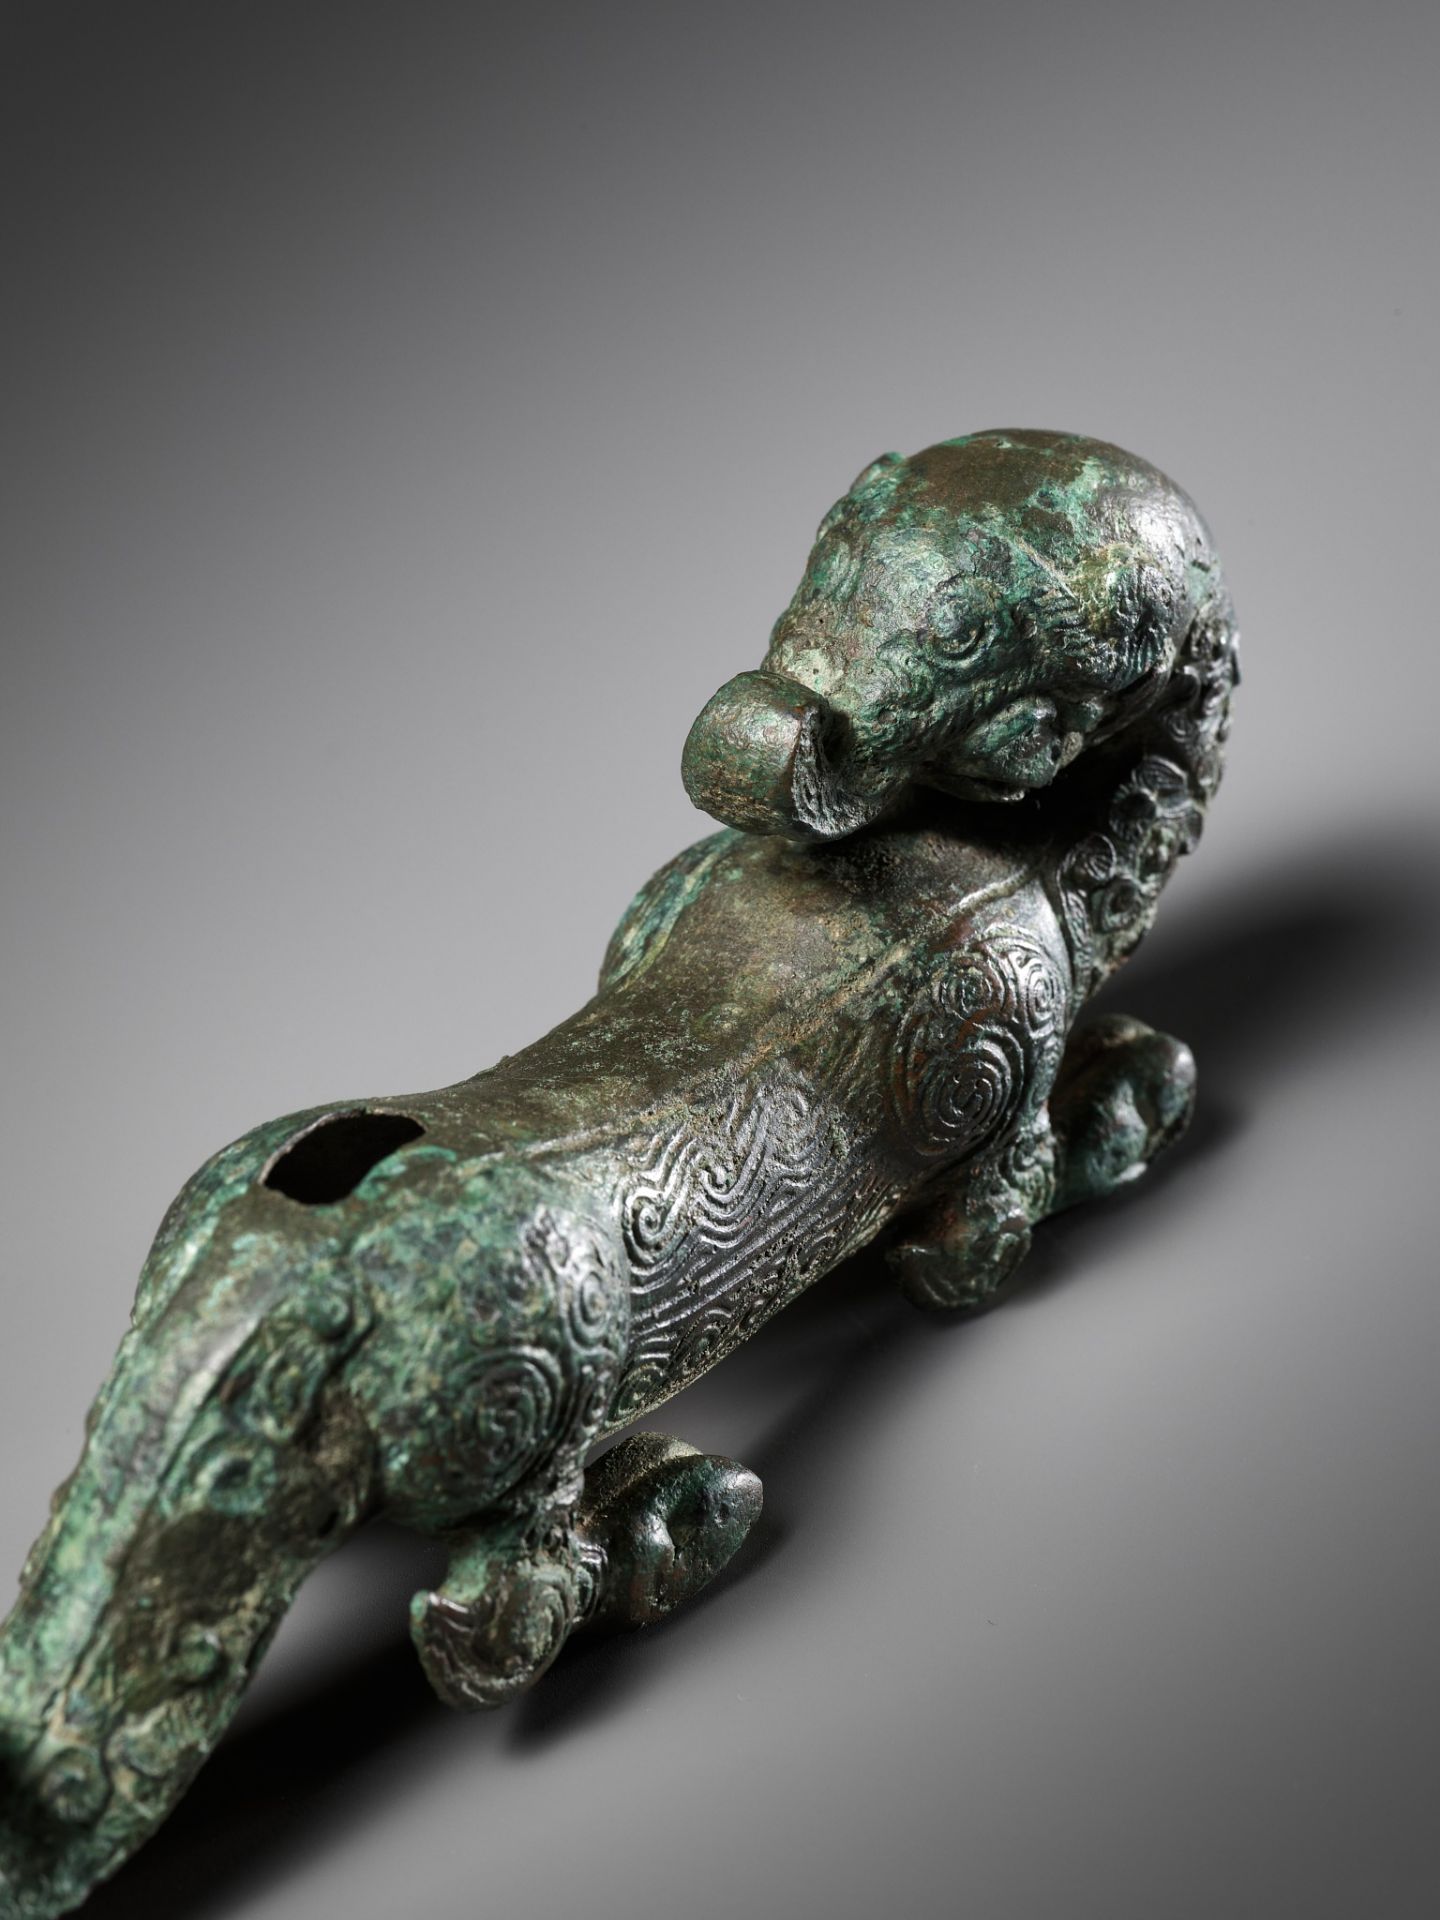 A SUPERB BRONZE FIGURE OF A DRAGON, EASTERN ZHOU DYNASTY, CHINA, 770-256 BC - Image 23 of 23